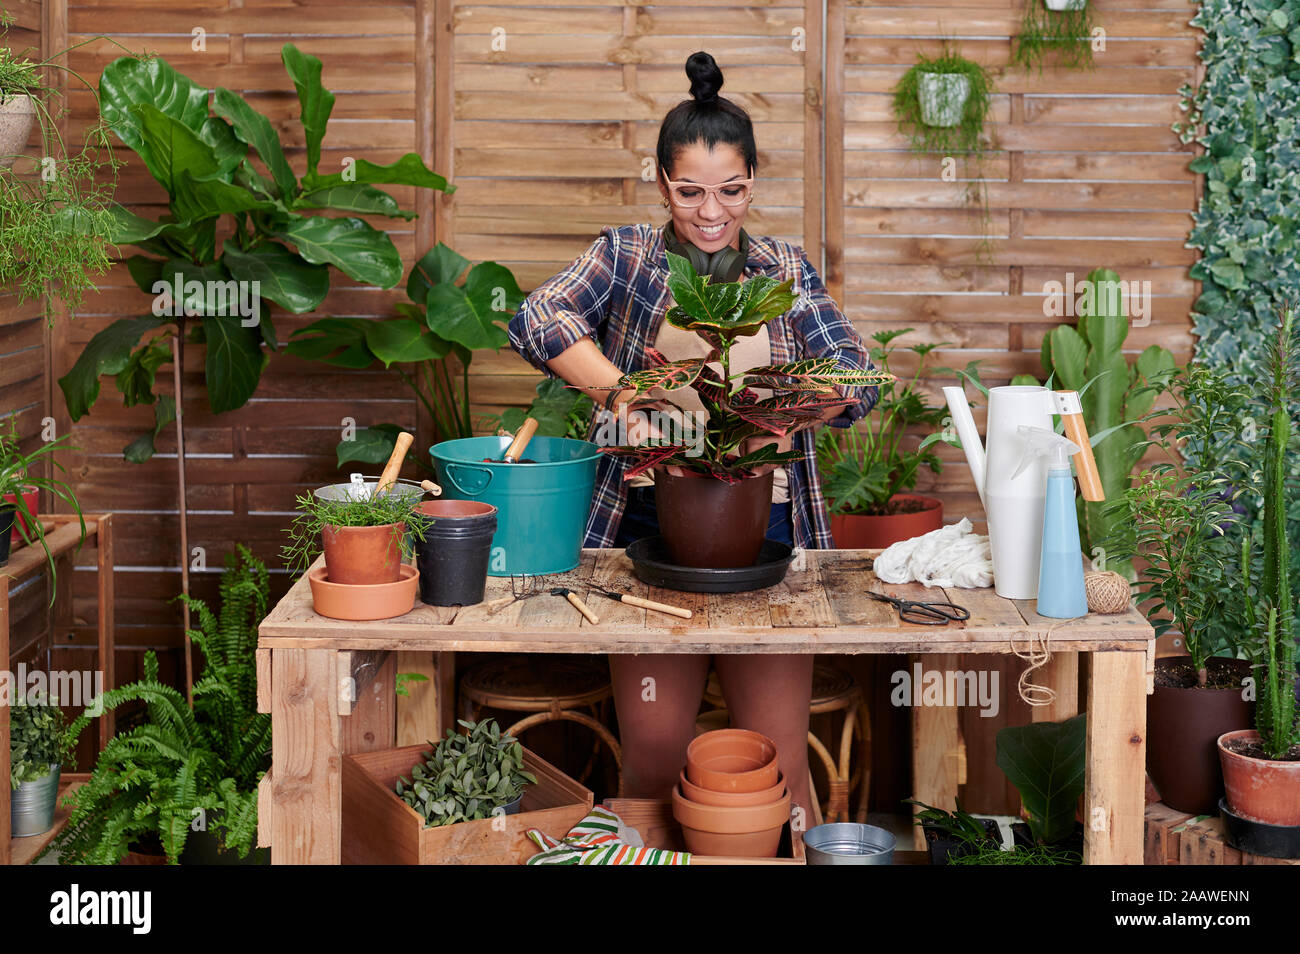 Smiling young woman gardening on her terrace Stock Photo